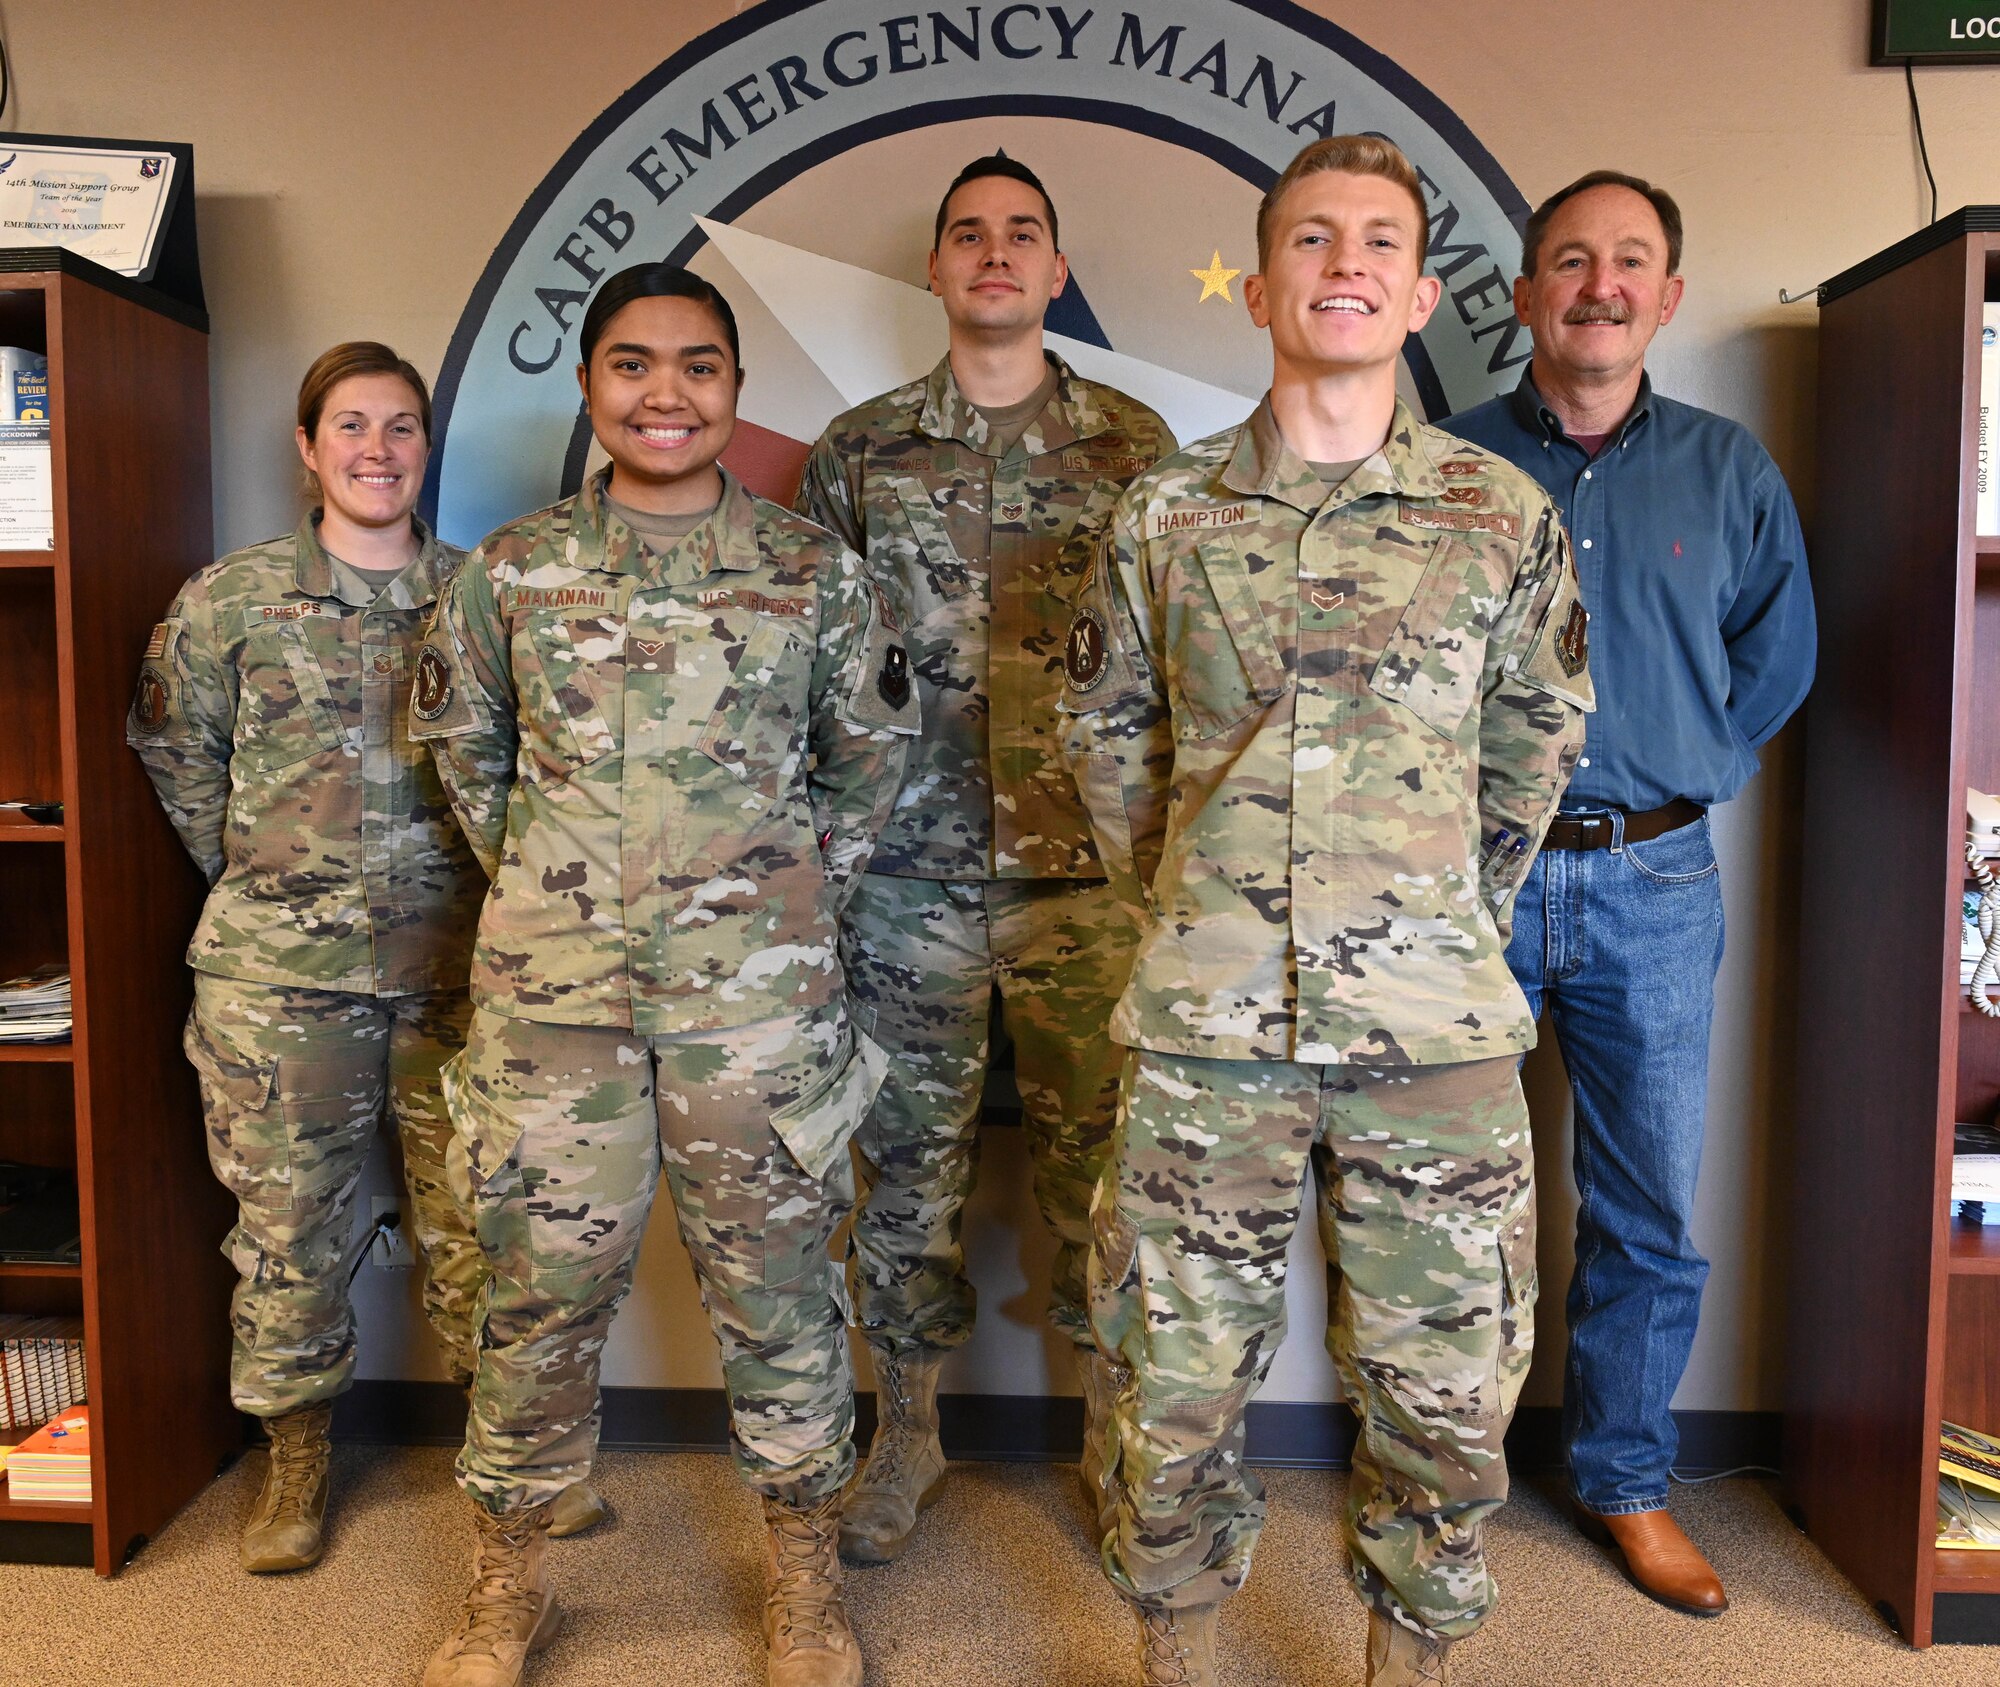 The 14th Civil Engineer Squadron Readiness and Emergency Management flight stands in front of their logo Nov. 24, 2020, on Columbus Air Force Base, Miss. The R&EM flight won the Major Command level Col. Frederick J. Reimer Award which honors the lifetime accomplishments of the man considered to be the founder of Disaster Preparedness and a pioneer of the Air Force’s current Readiness Program. (U.S. Air Force photo by Senior Airman Jake Jacobsen)